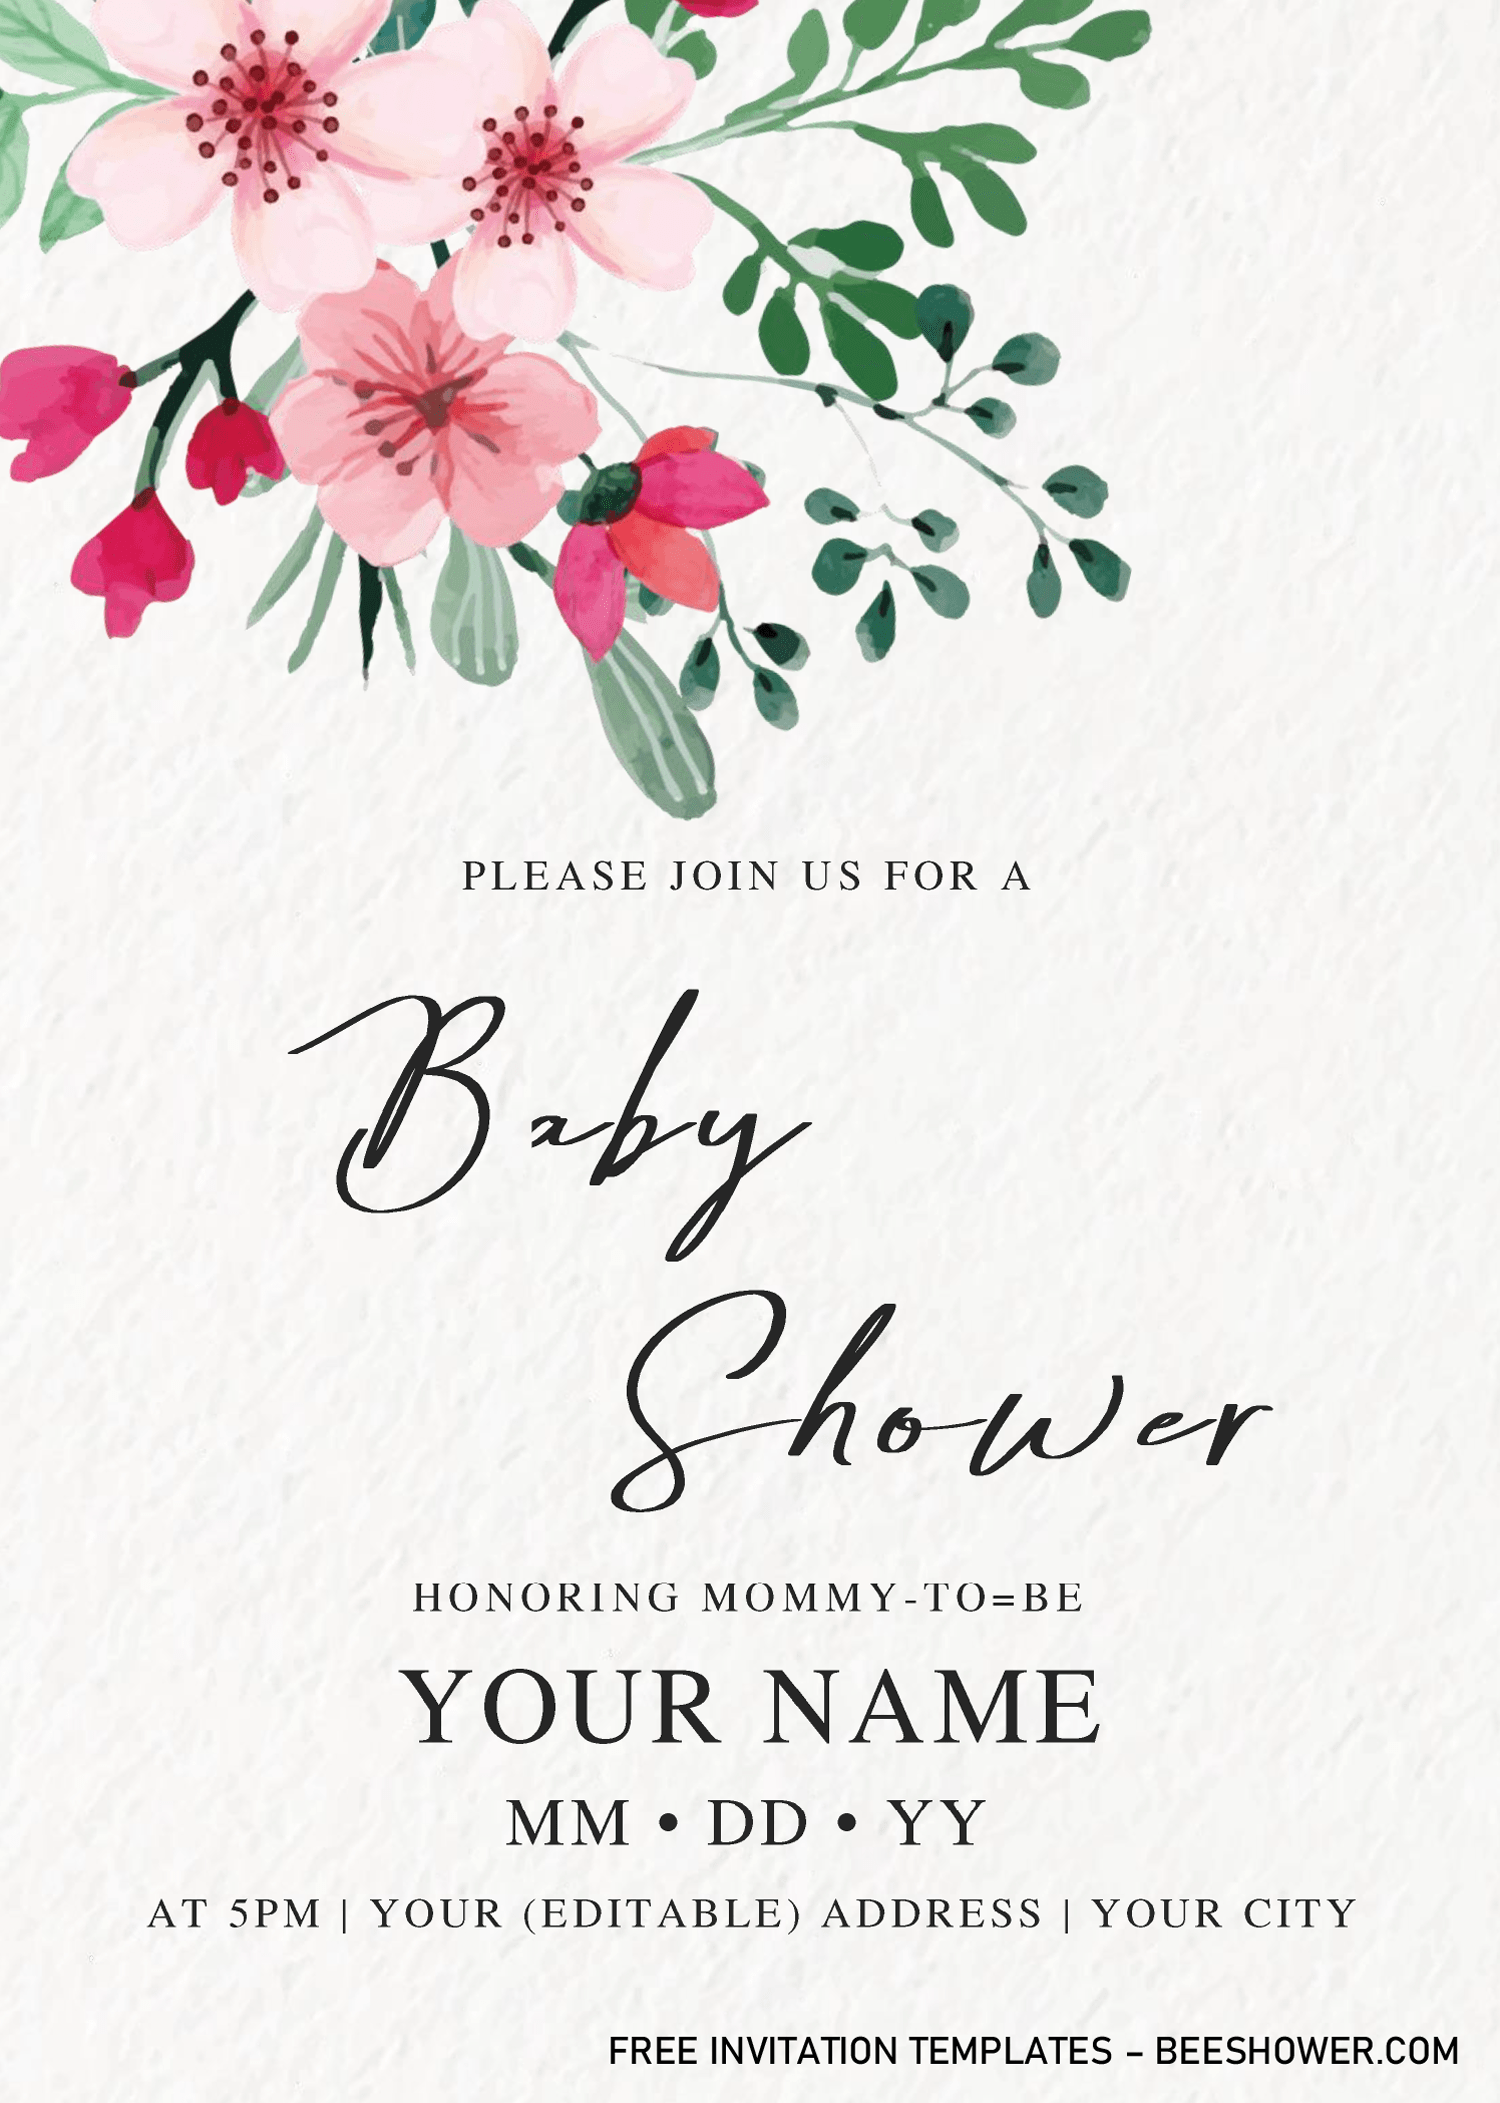 botanical-baby-shower-invitation-templates-editable-with-ms-word-free-printable-baby-shower